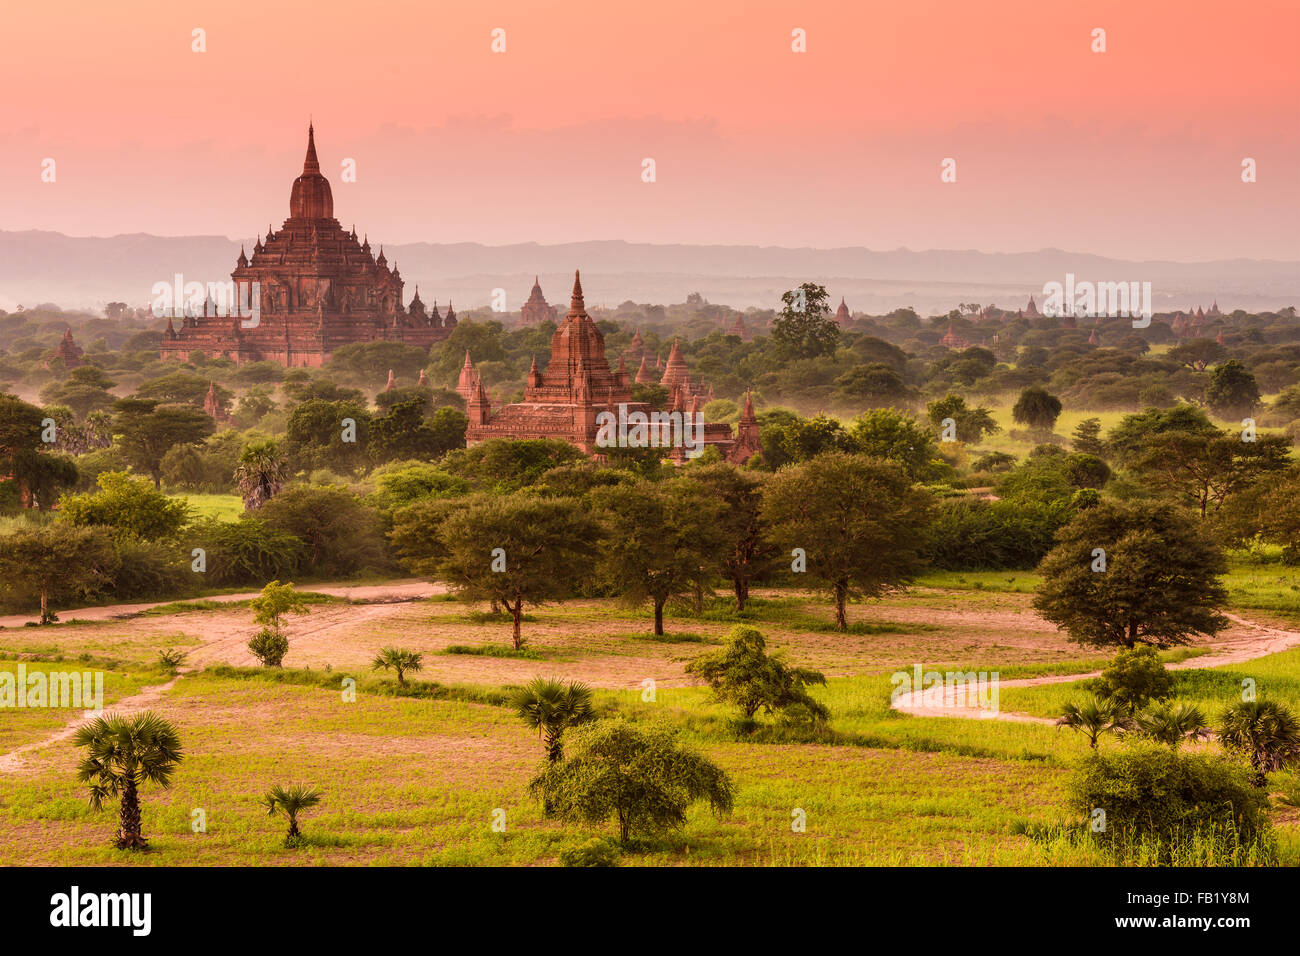 Bagan, Myanmar temples in the Archaeological Park. Stock Photo